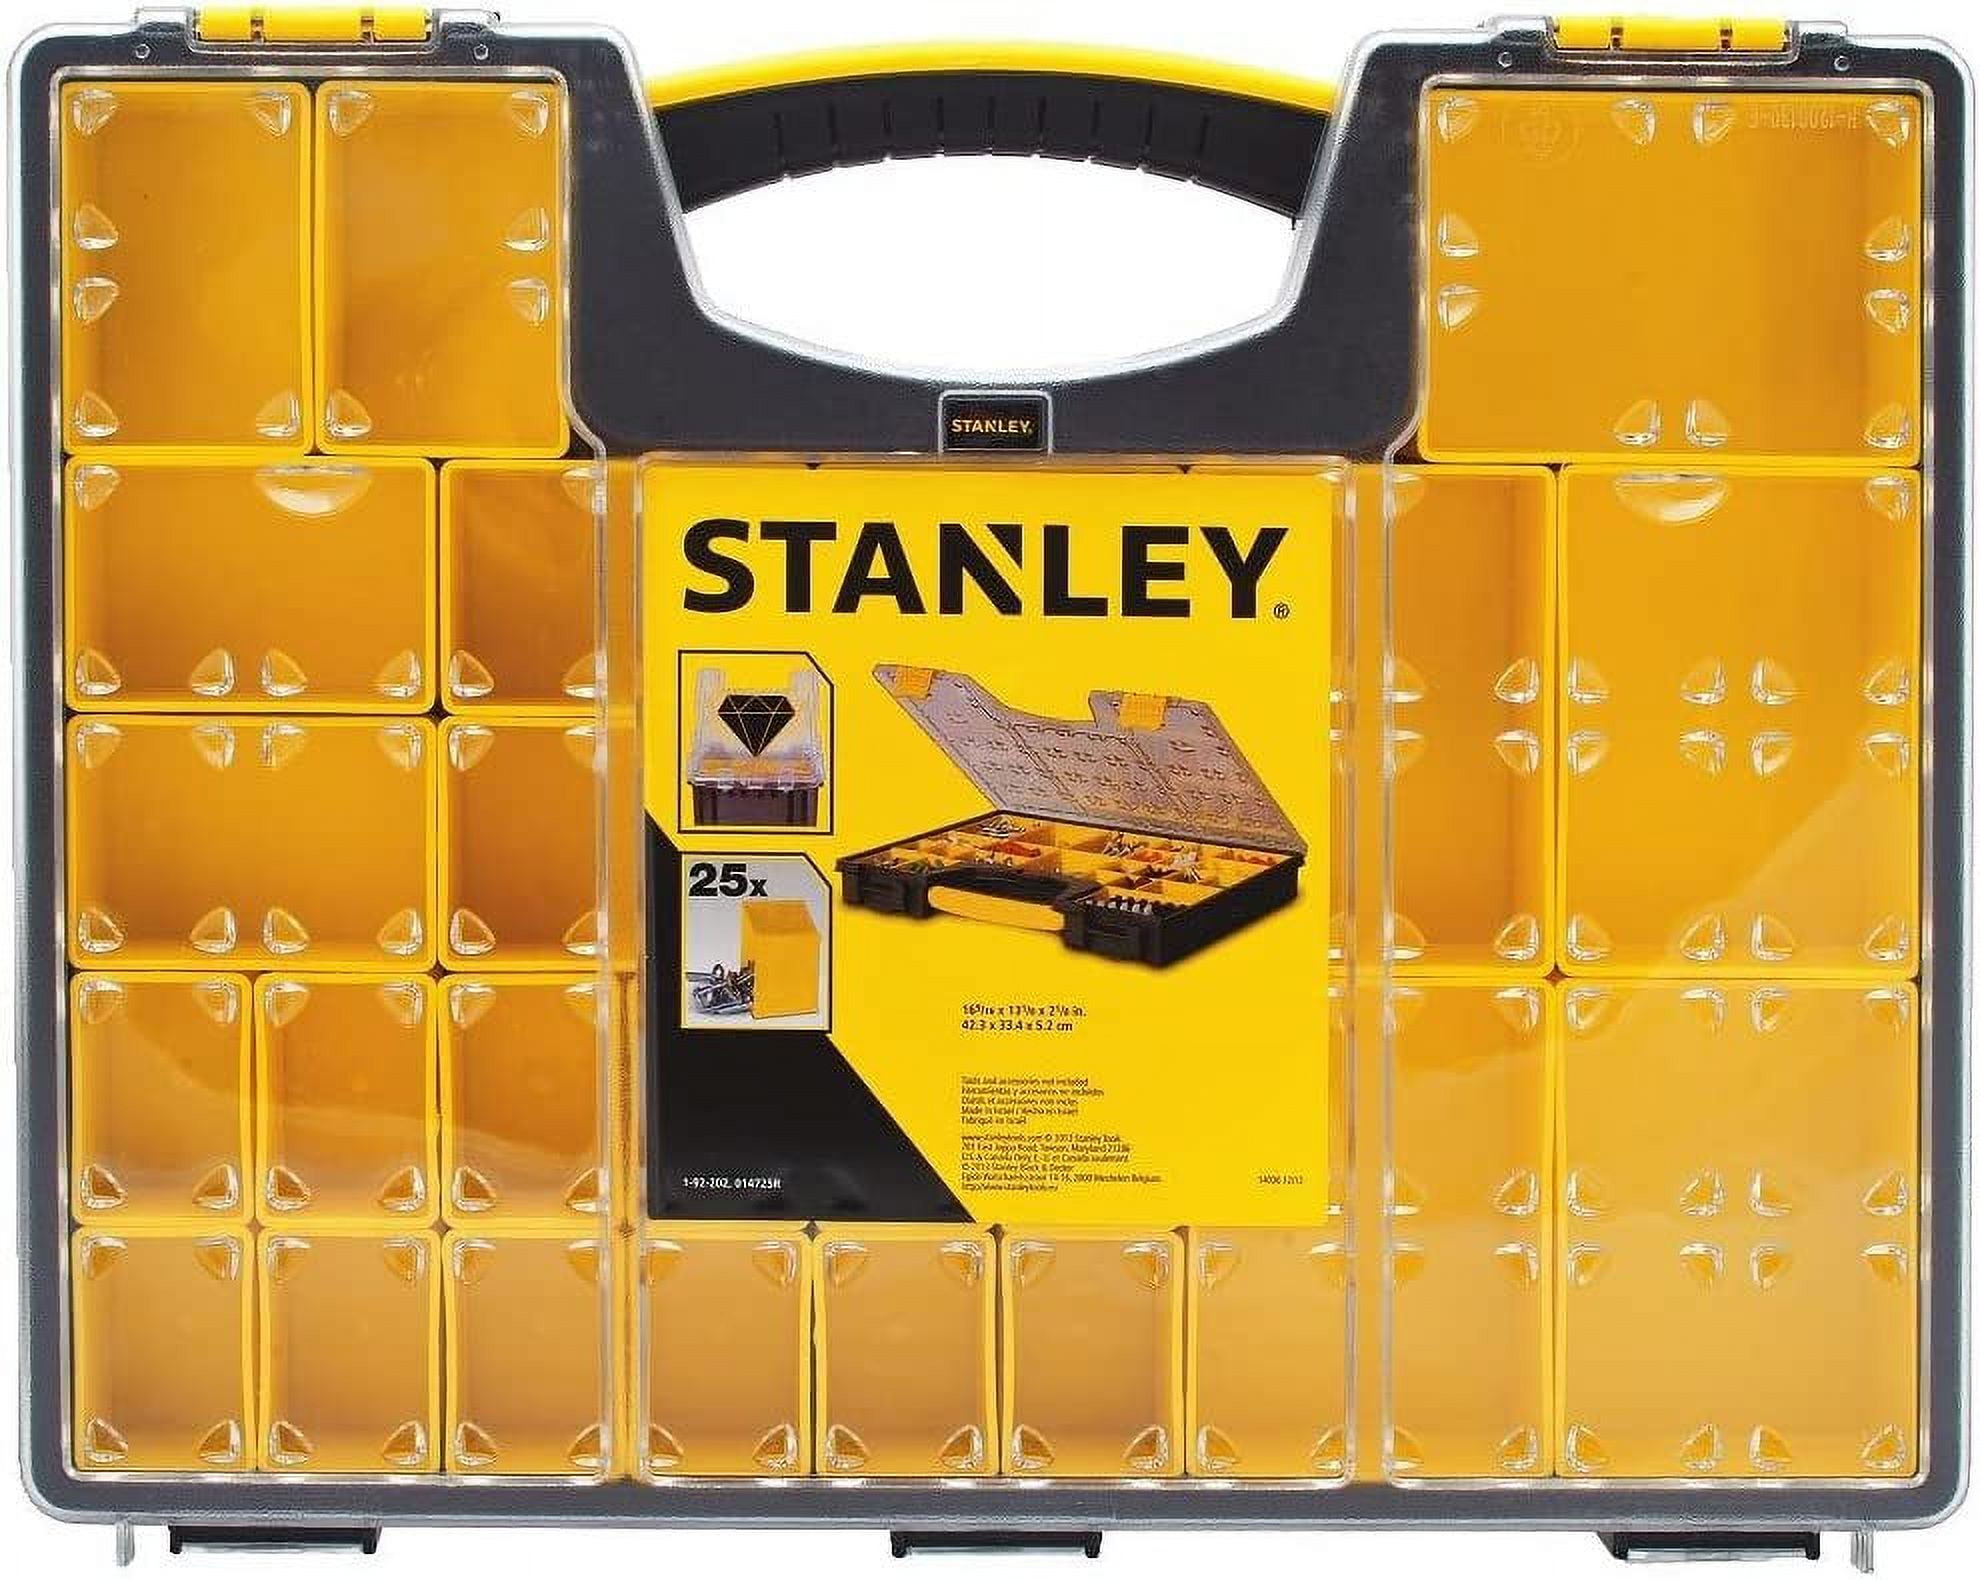 STANLEY Organizer Box With Dividers, Removable Compartment, 25